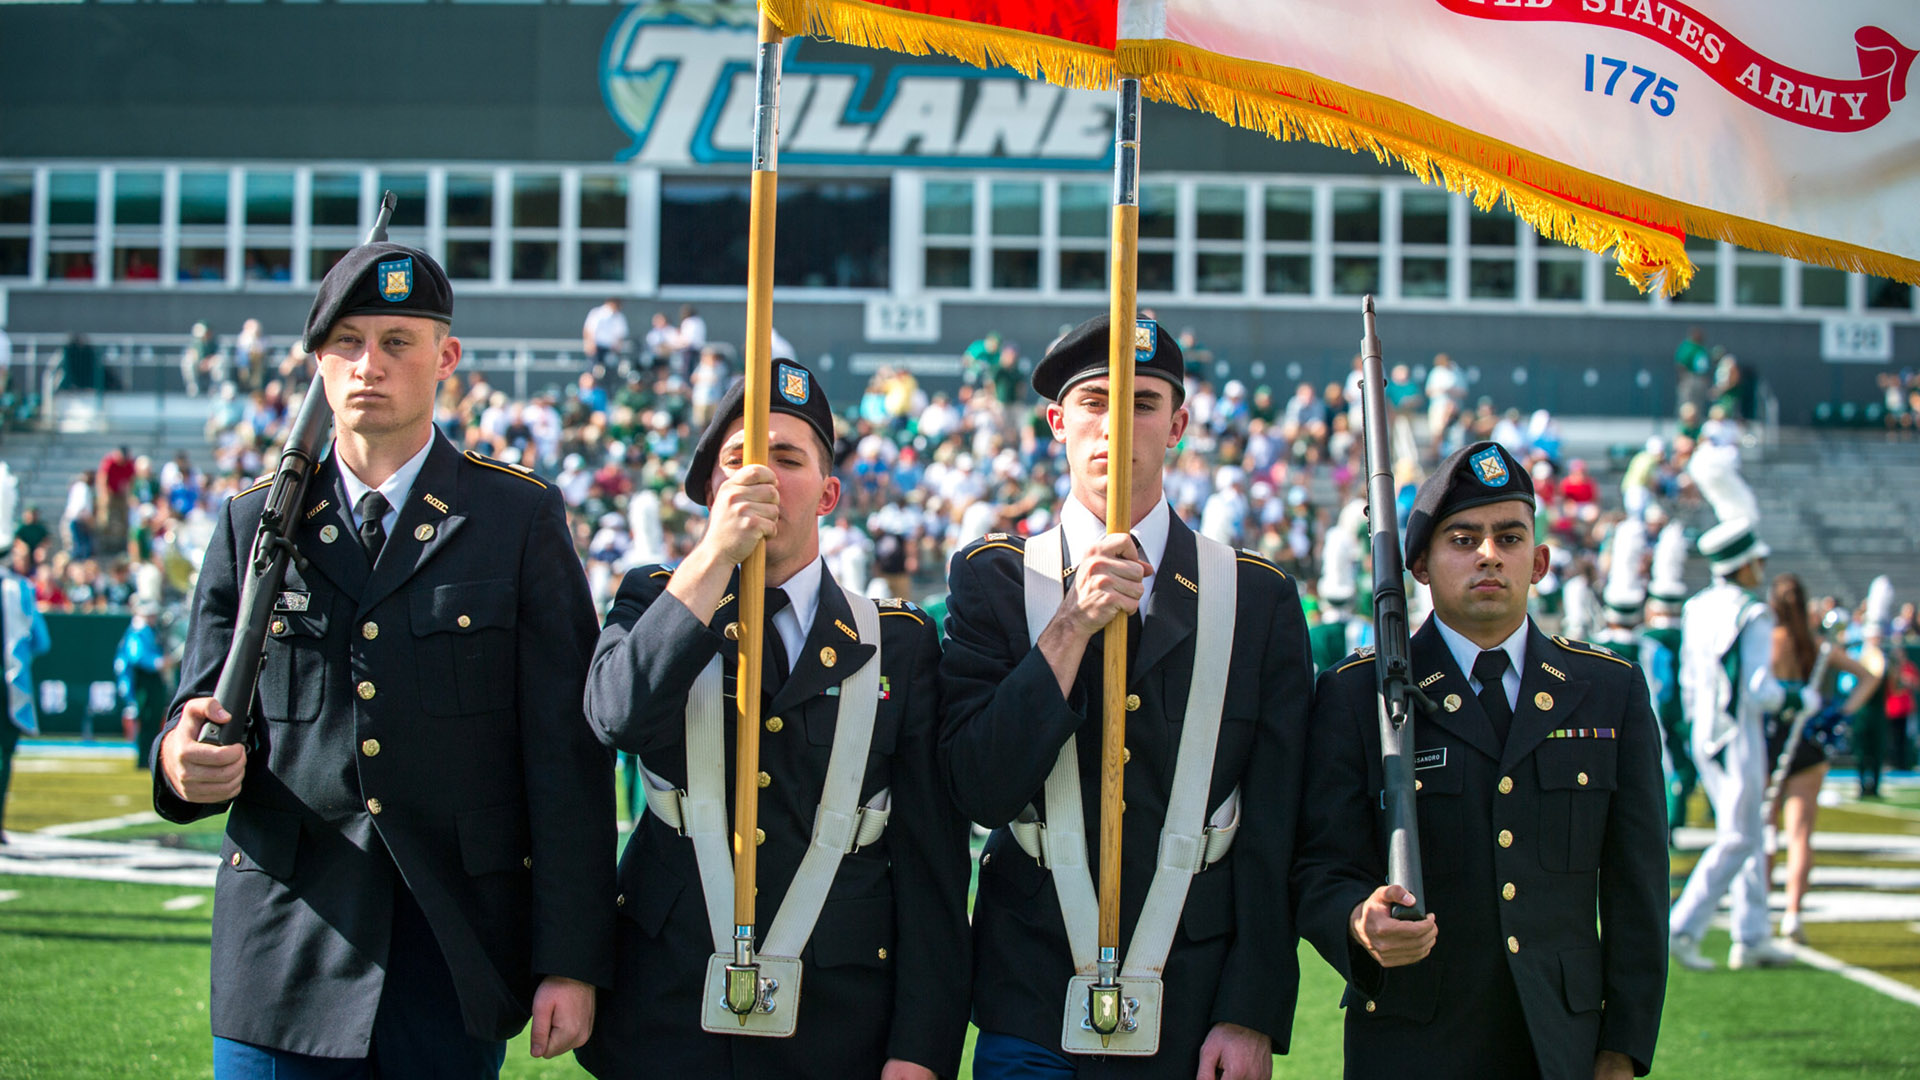  Members of the ROTC at Tulane carry flags and rifles on the field.